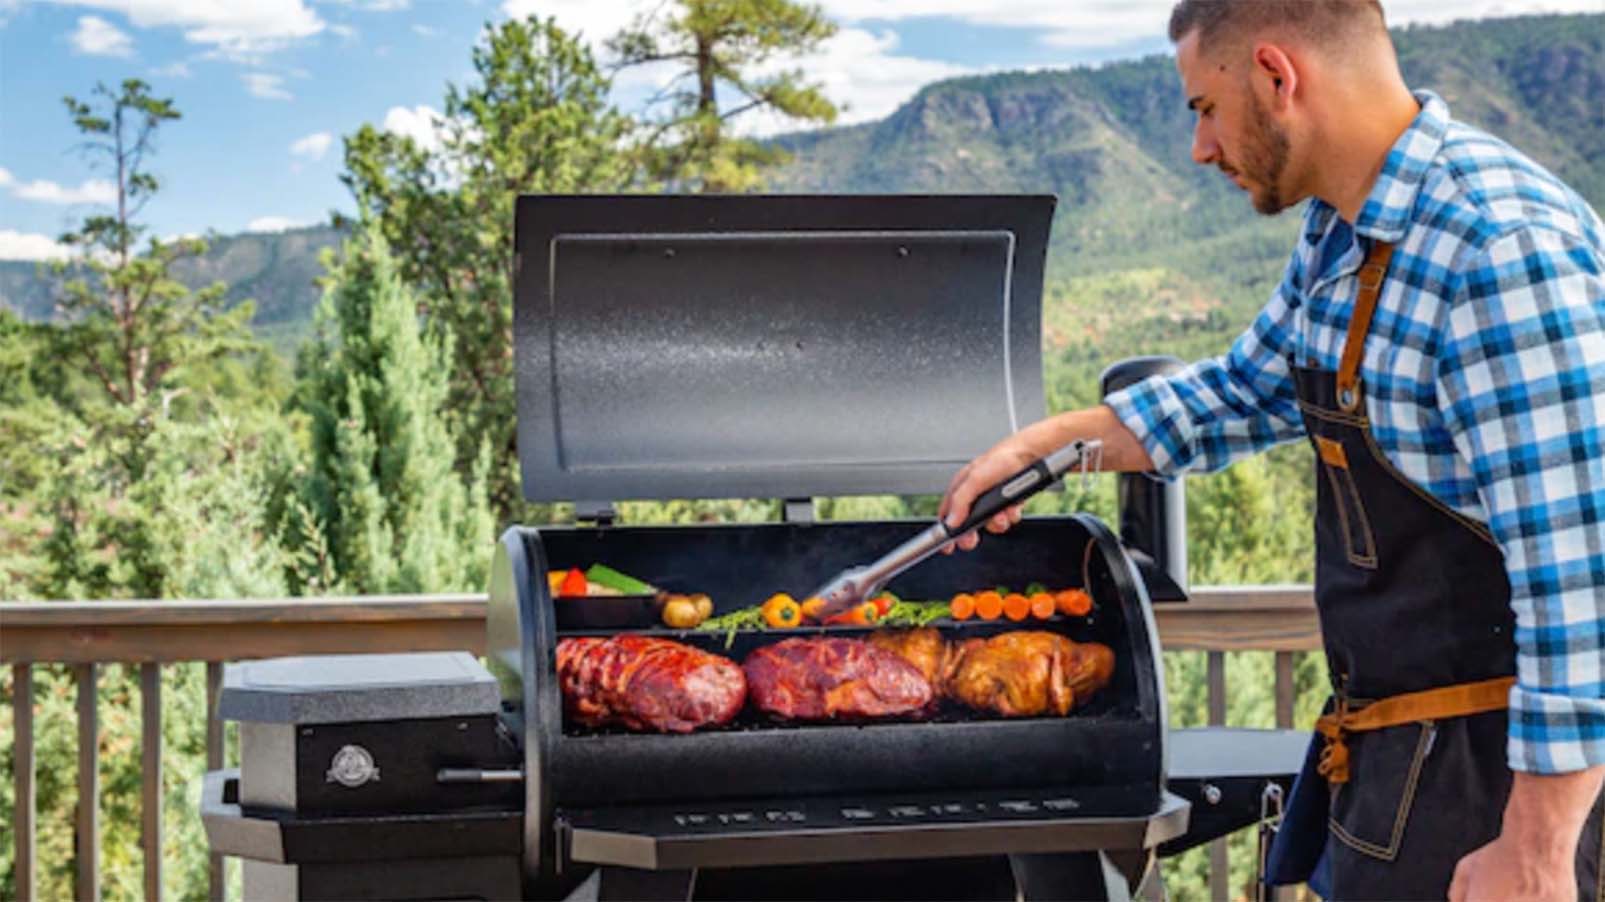 Grill Lowes - The Best Barbecue Grills You Can Buy